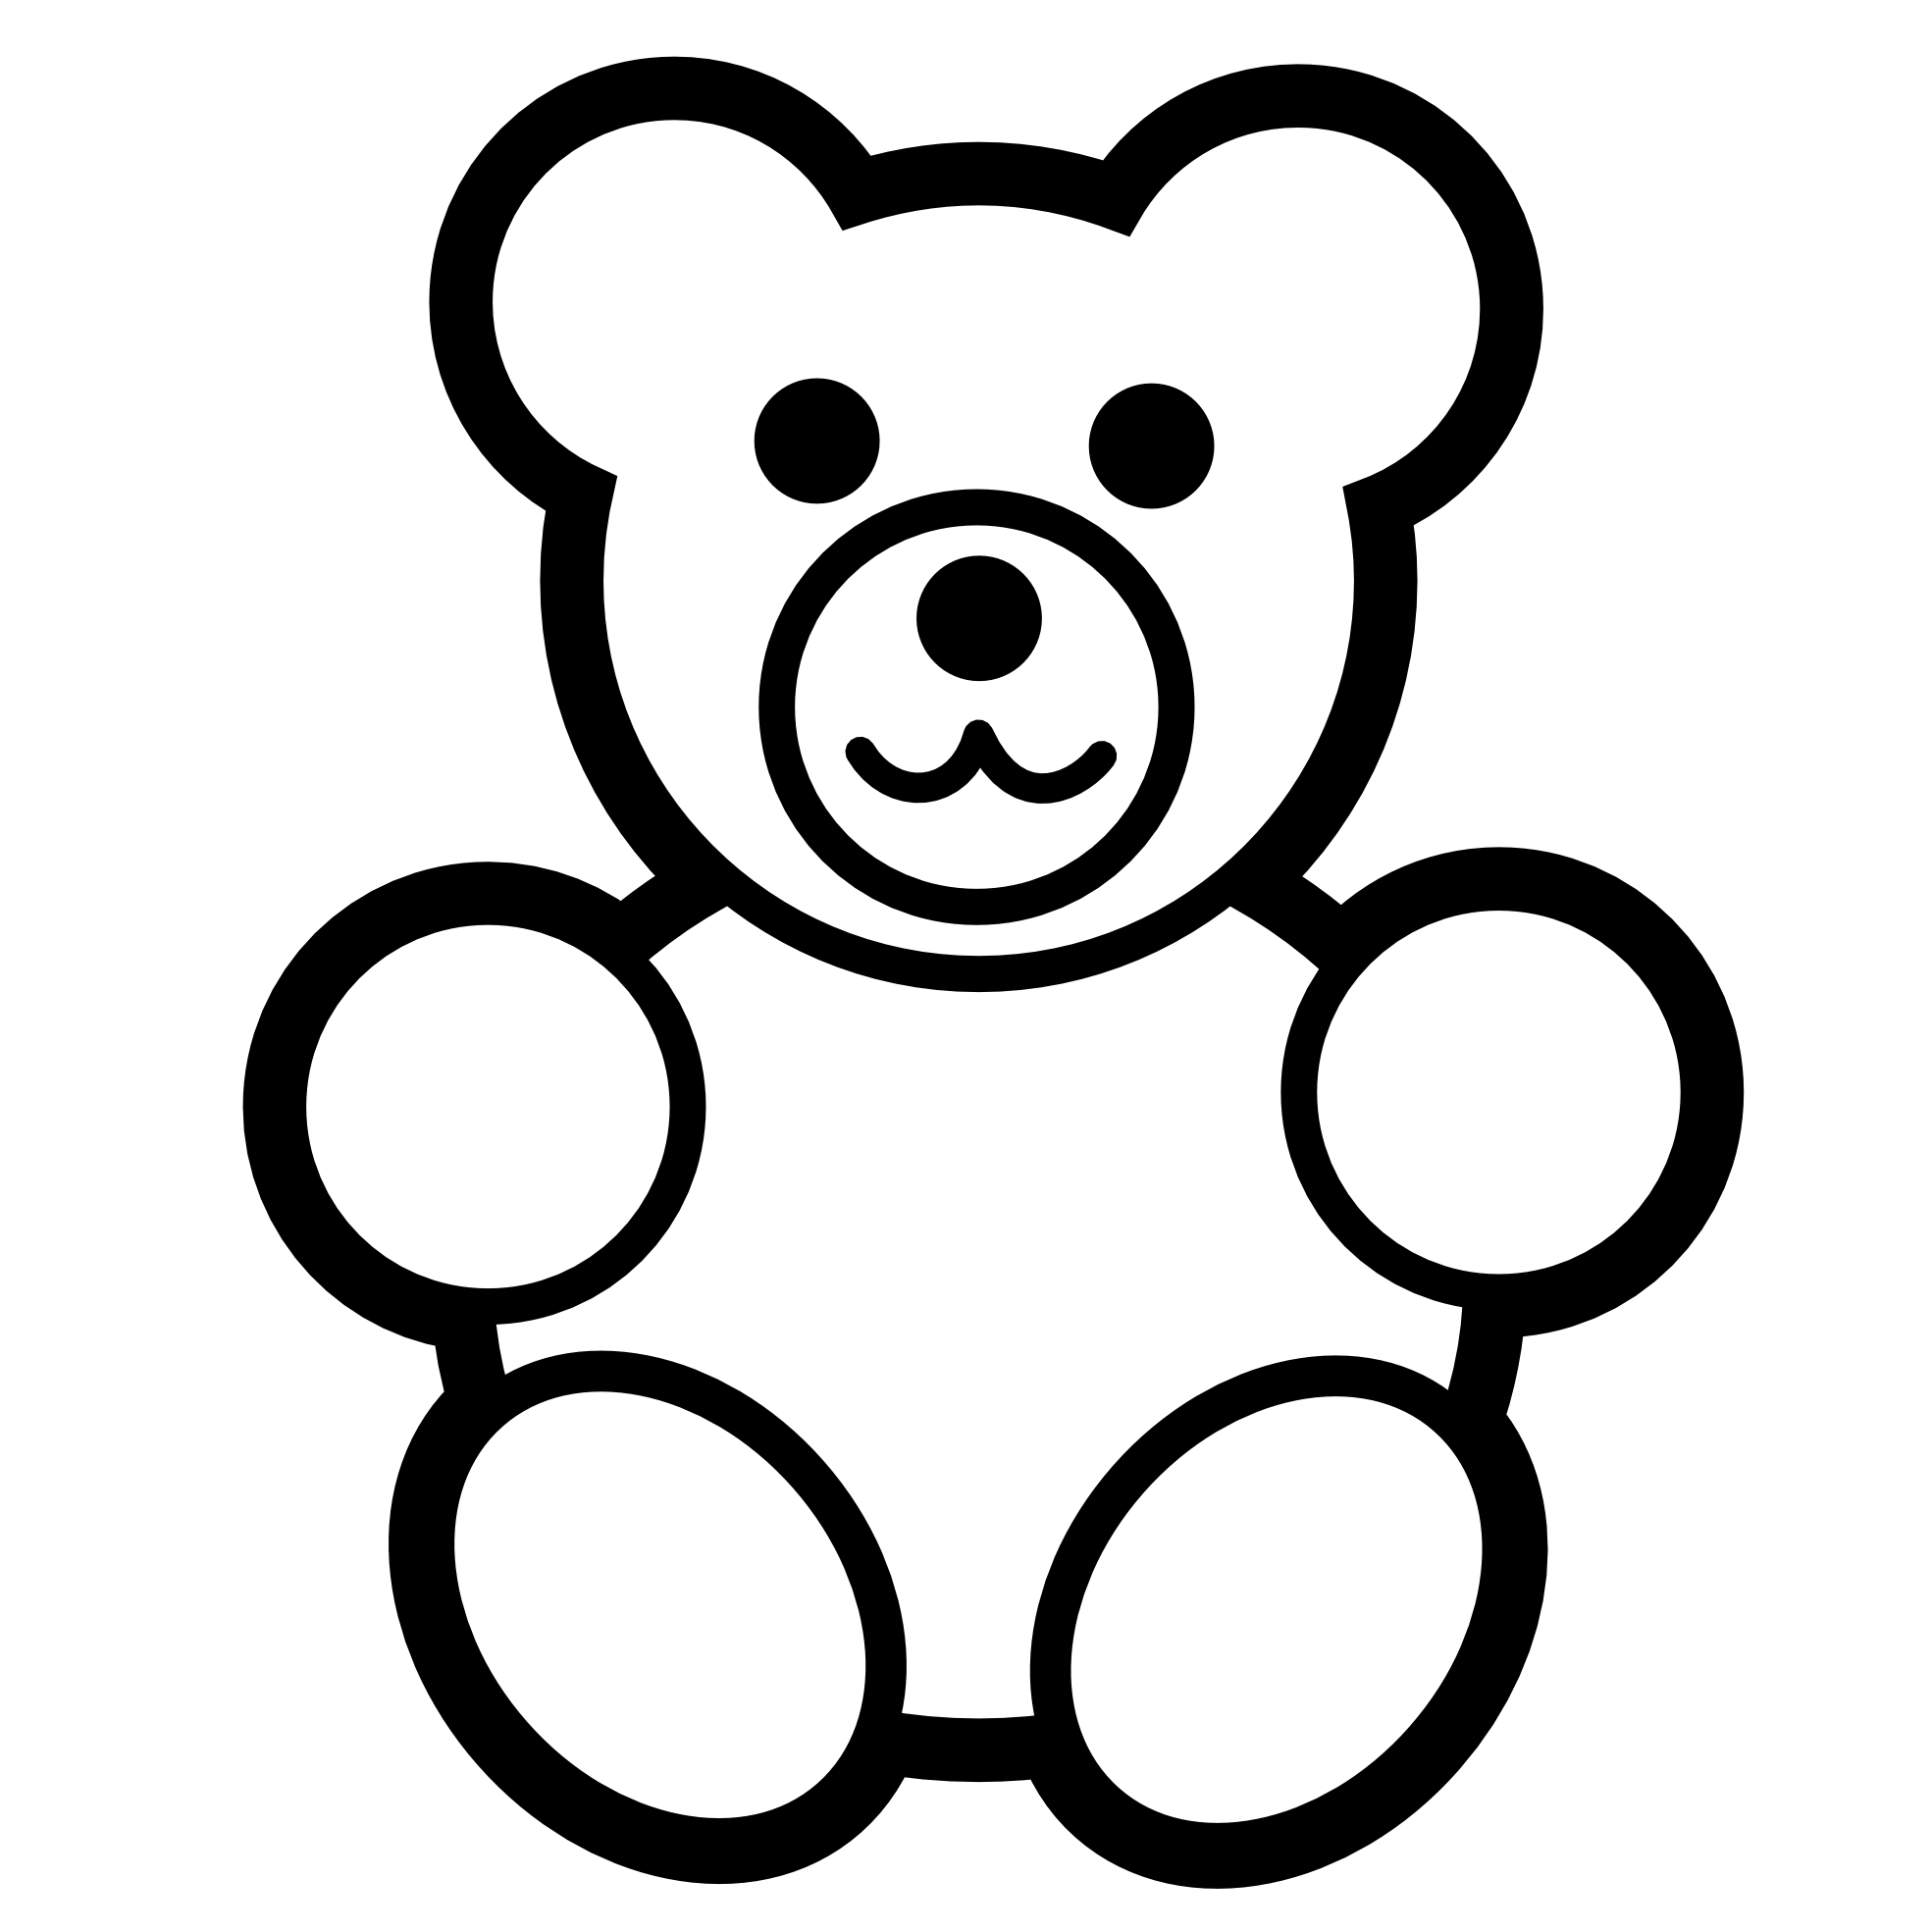 Teddy bear  black and white teddy bear clipart black and white free 2